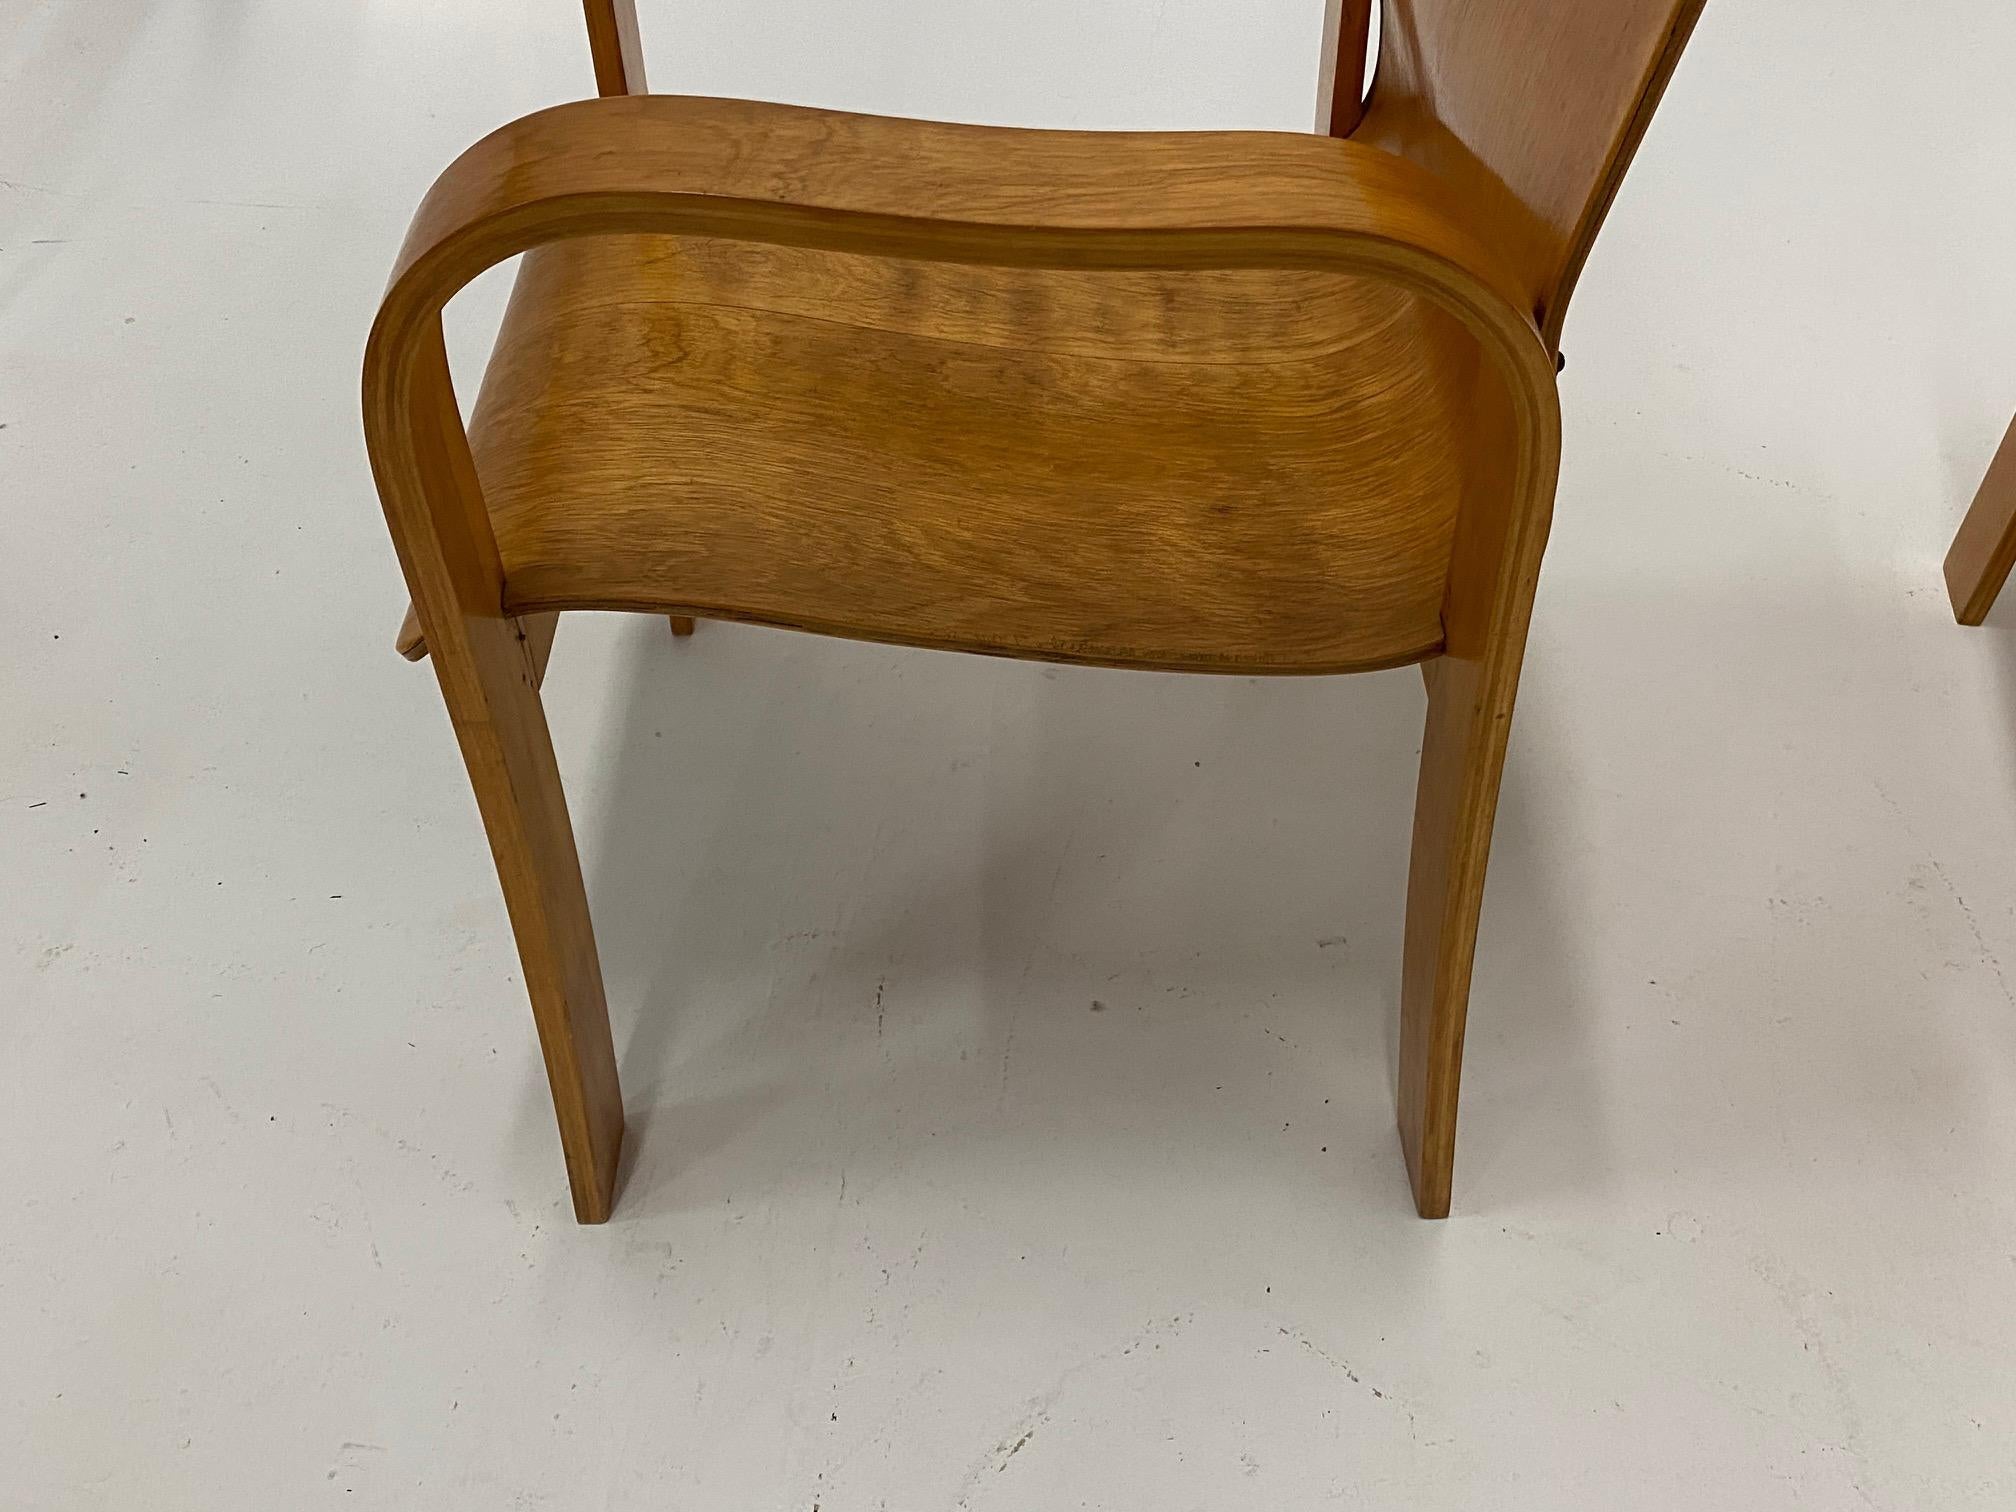 Rare Pair of Sleek Molded Plywood Mid-Century Modern Armchairs For Sale 4